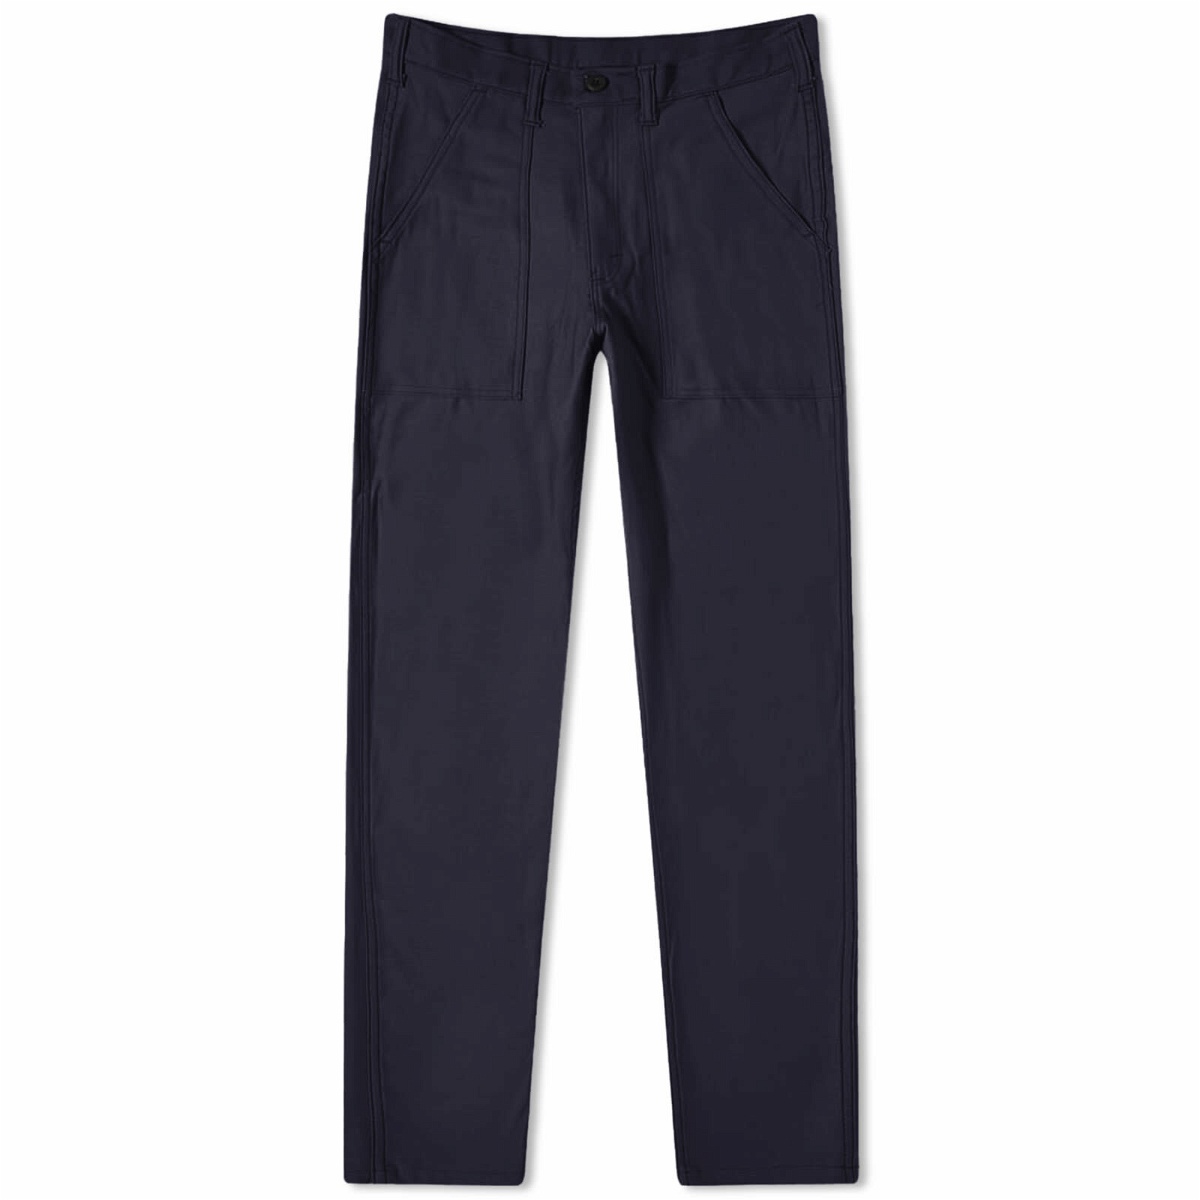 Stan Ray Men's Slim Fit 4 Pocket Fatigue Pant in Navy Ripstop Stan Ray